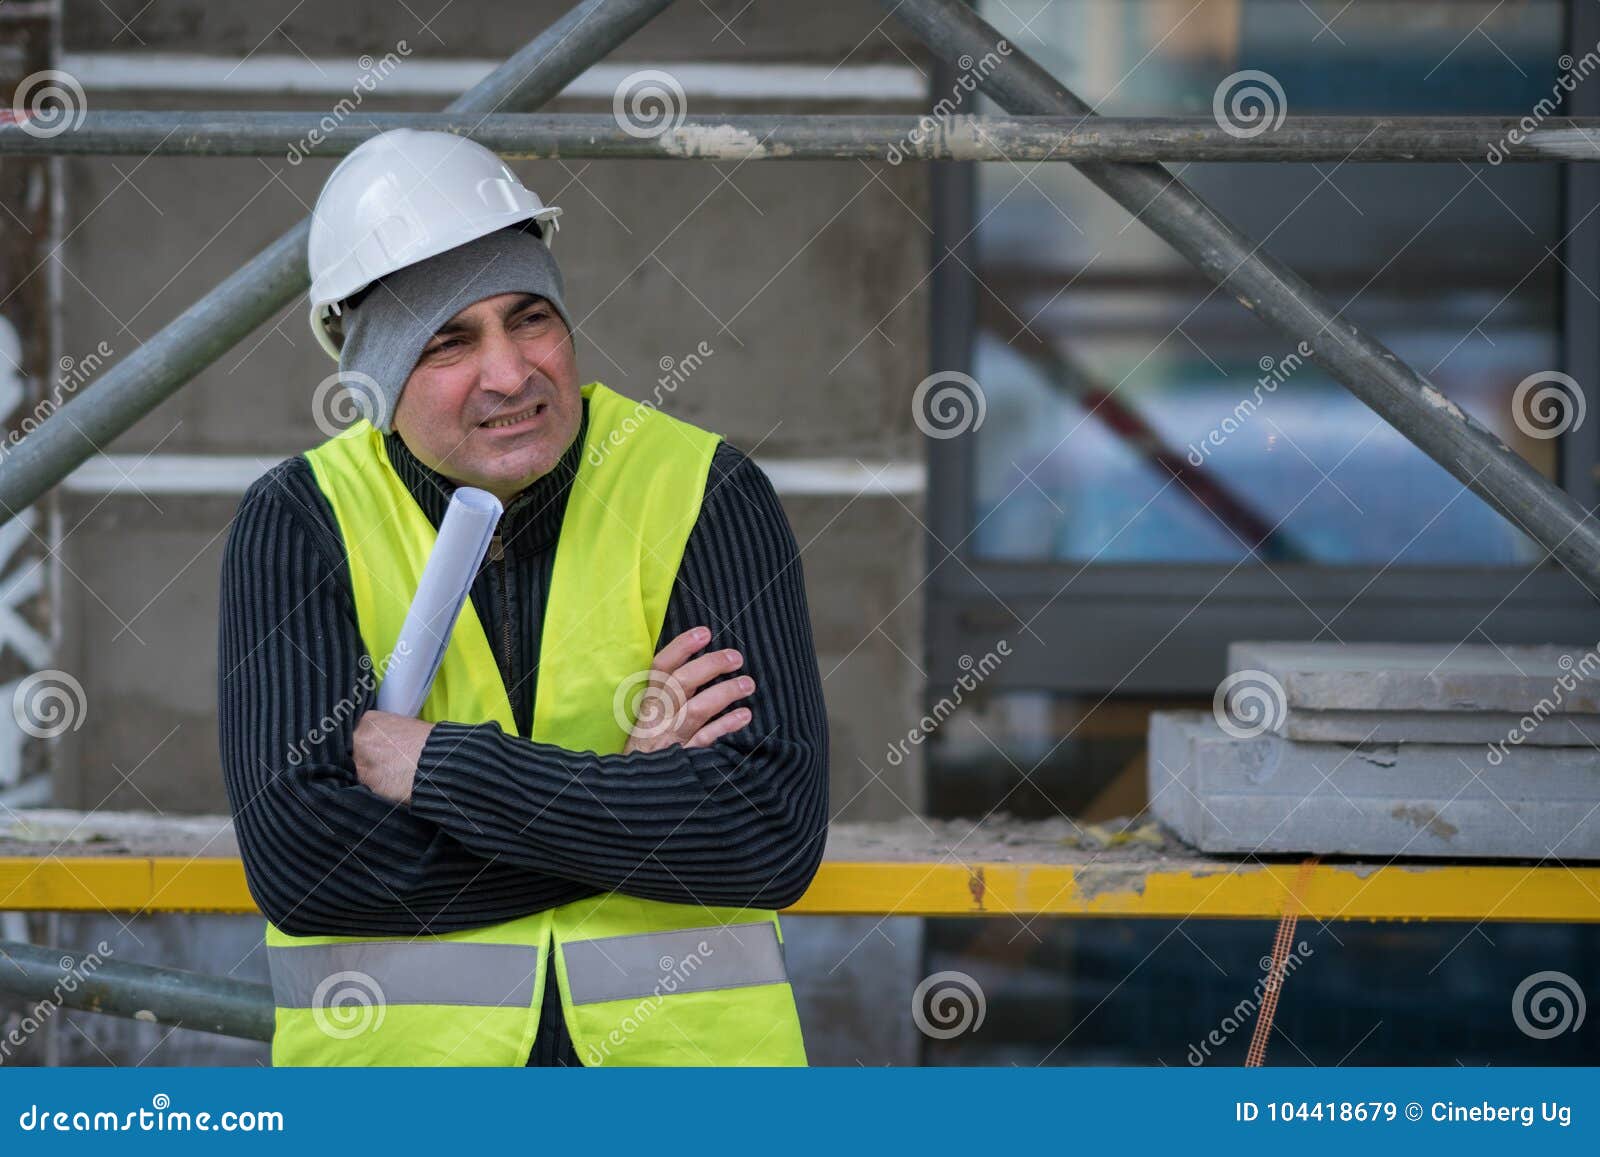 engineer with protective workwear freezing outdoors